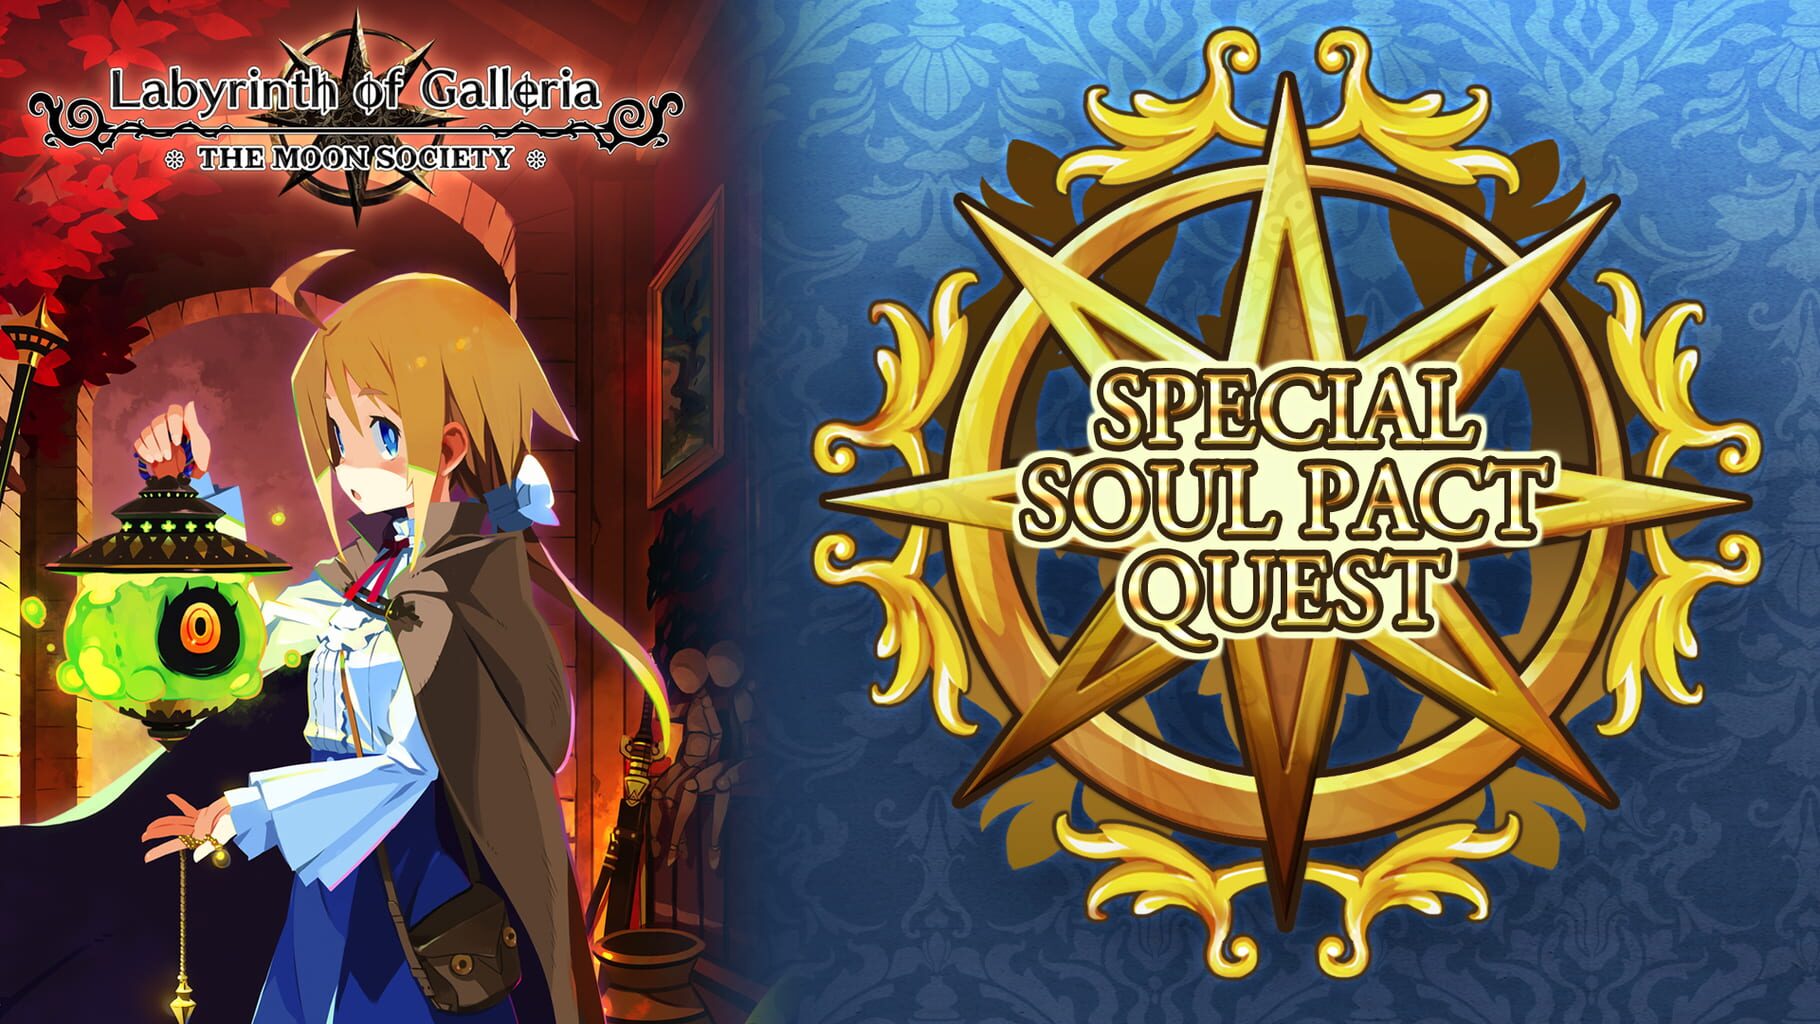 Arte - Labyrinth of Galleria: The Moon Society - Special Soul Pact Quest